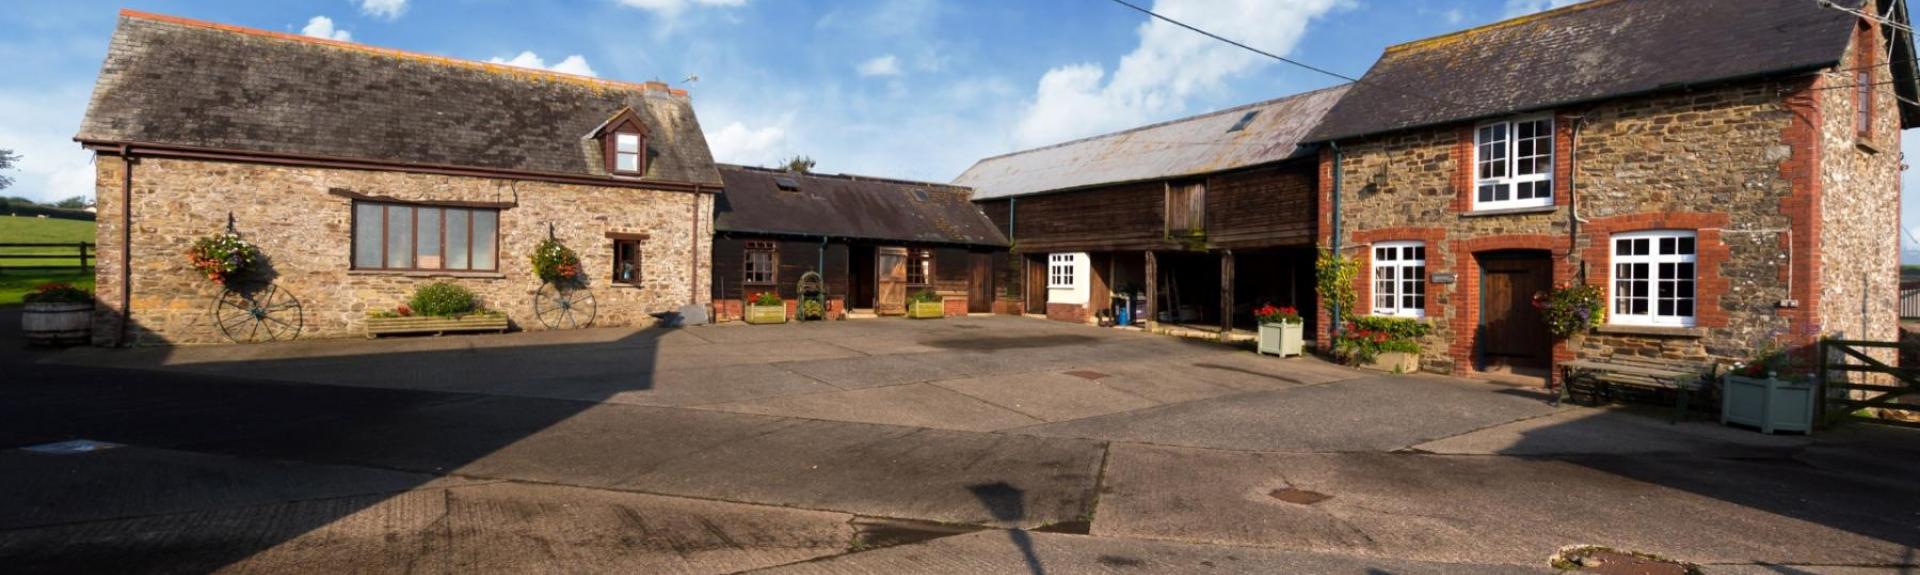 Farm Cottages in Converted Barns